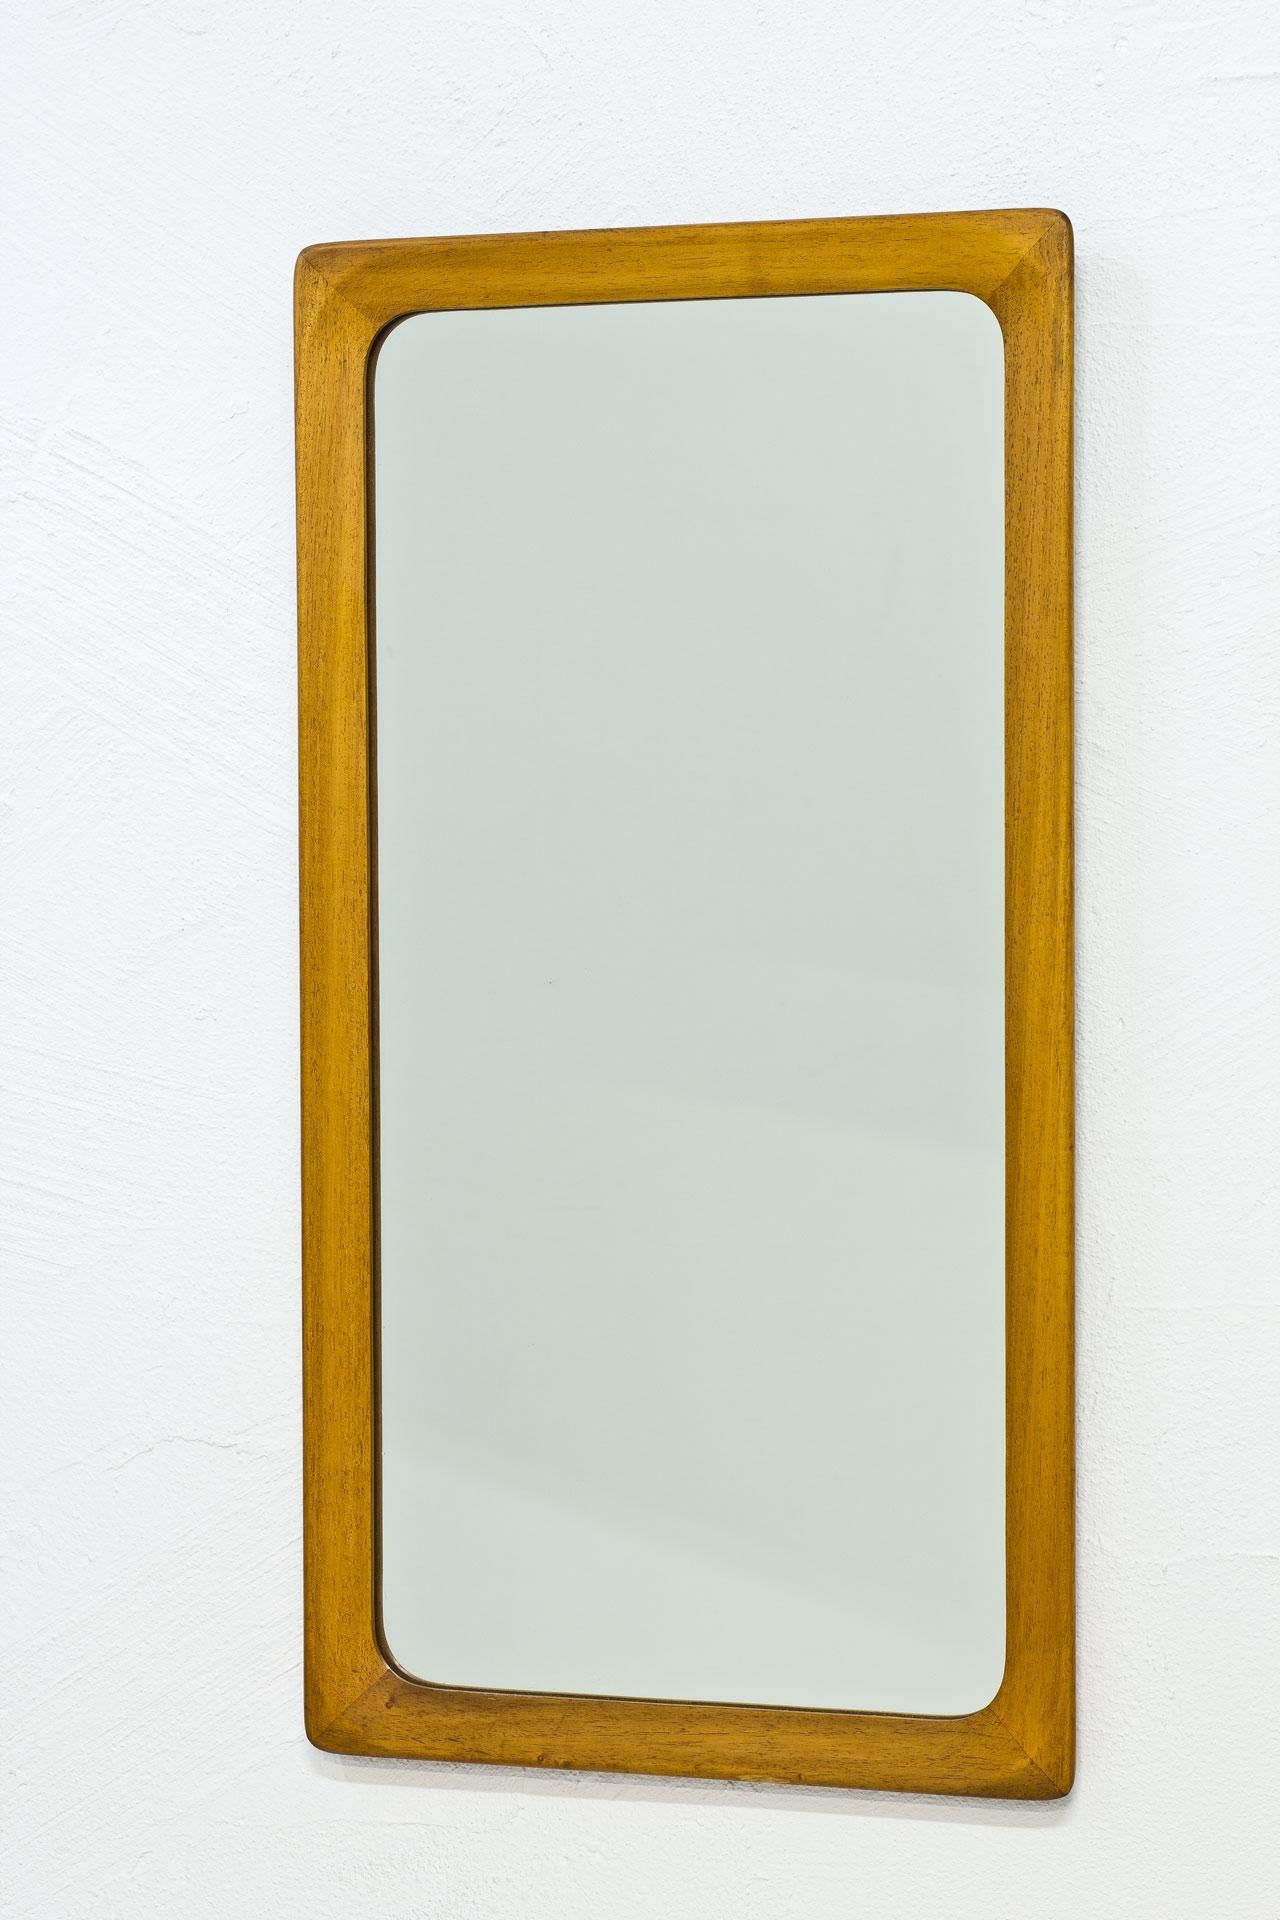 Rectangular birch wall mirror produced by unknown maker in Sweden during the 1940s. Solid birch frame with nice patina and joinery details.